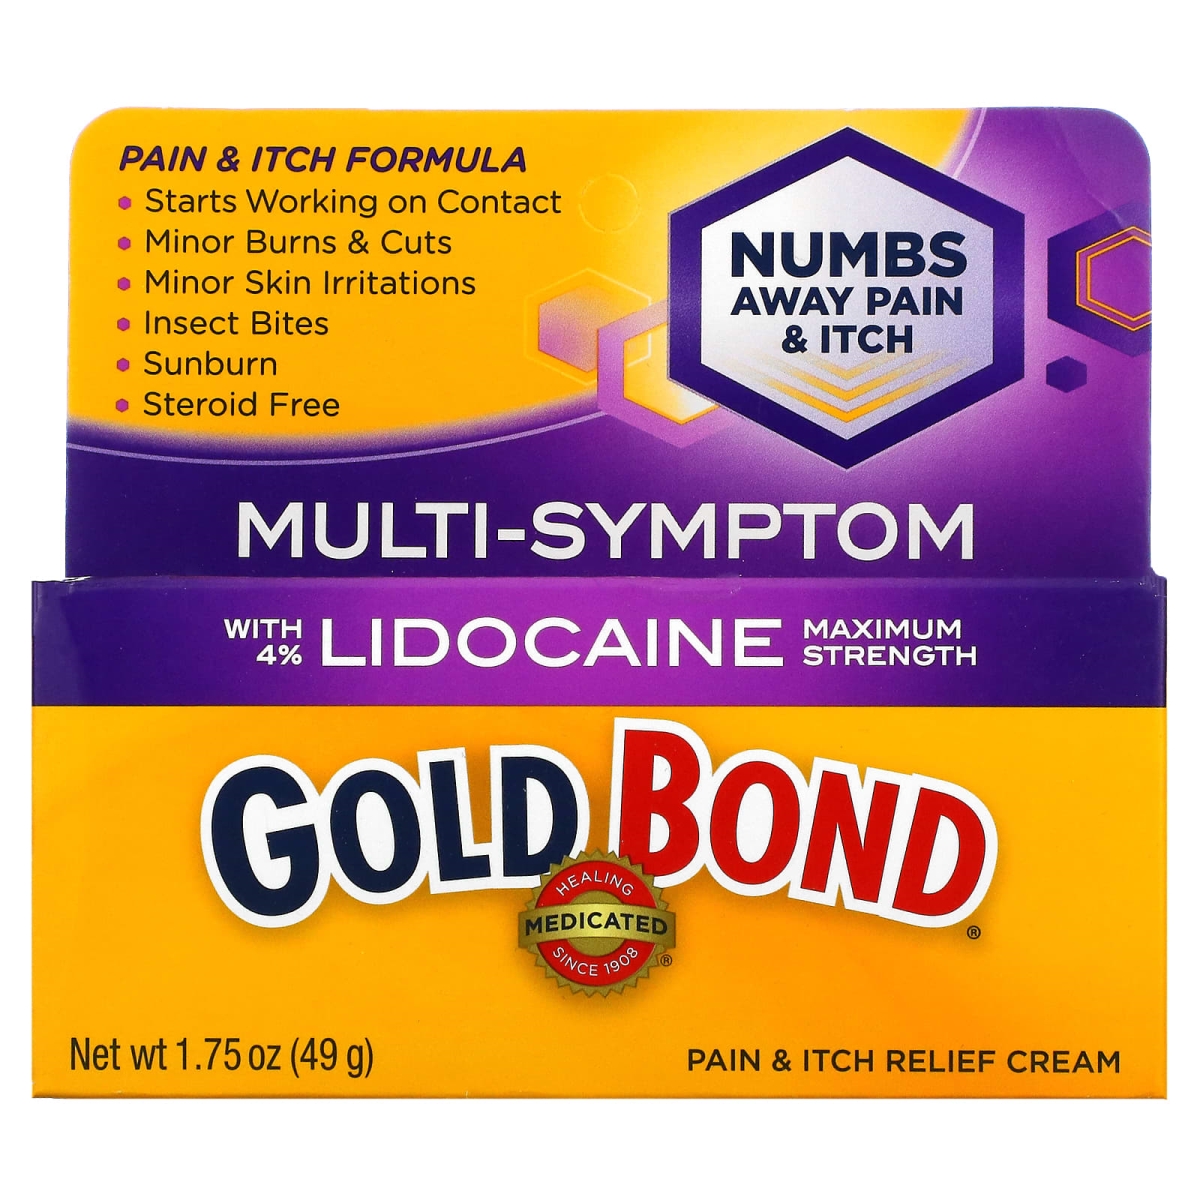 Gold Bond 788649 1.75 oz Medicated Pain & Itch Relief Cream